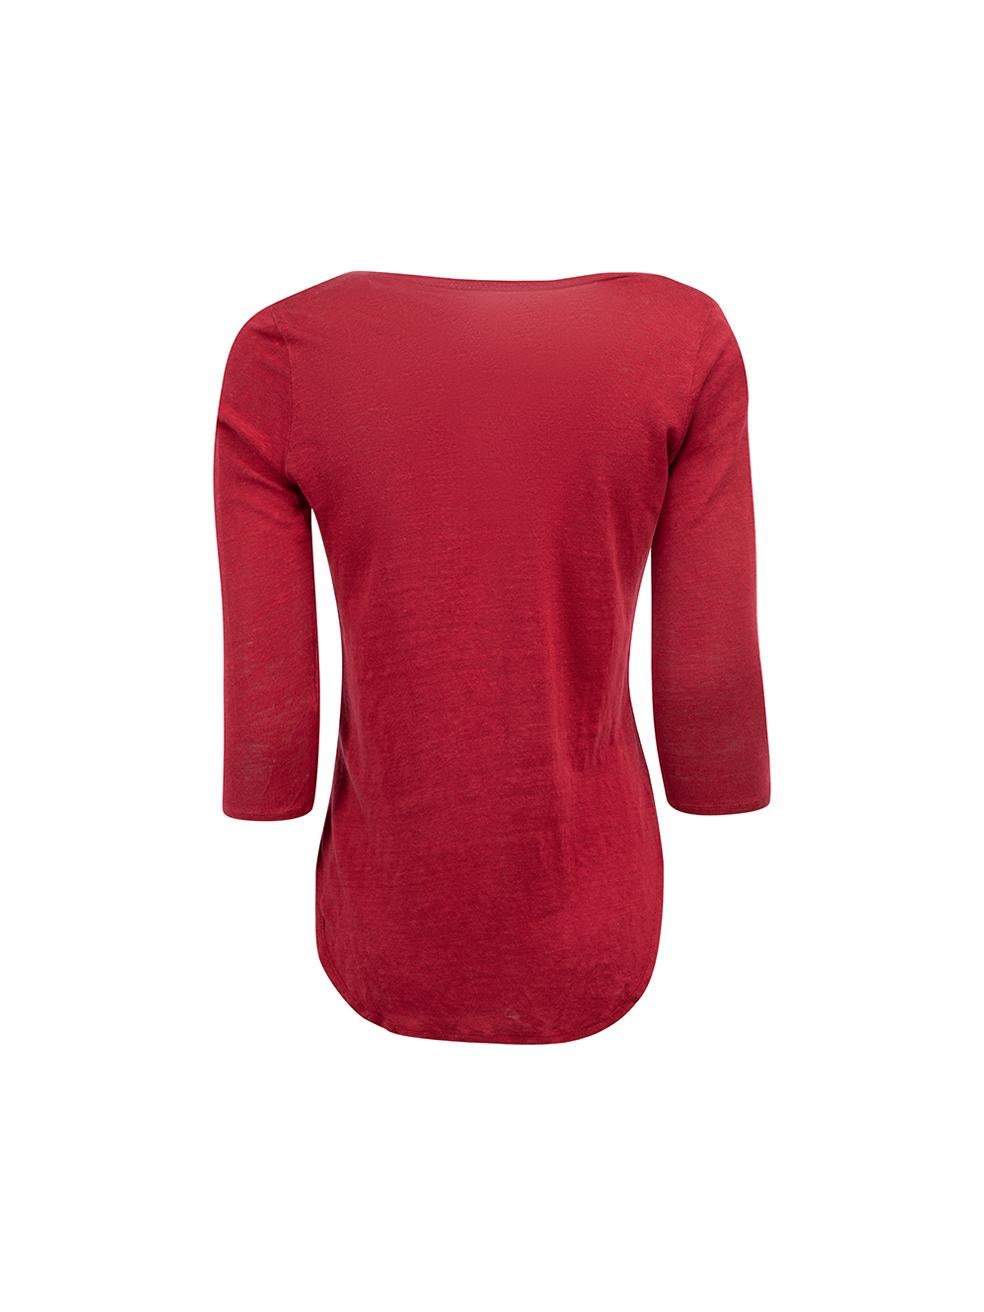 Sandro Red Fine Knit Round Neck Top Size S In Excellent Condition For Sale In London, GB